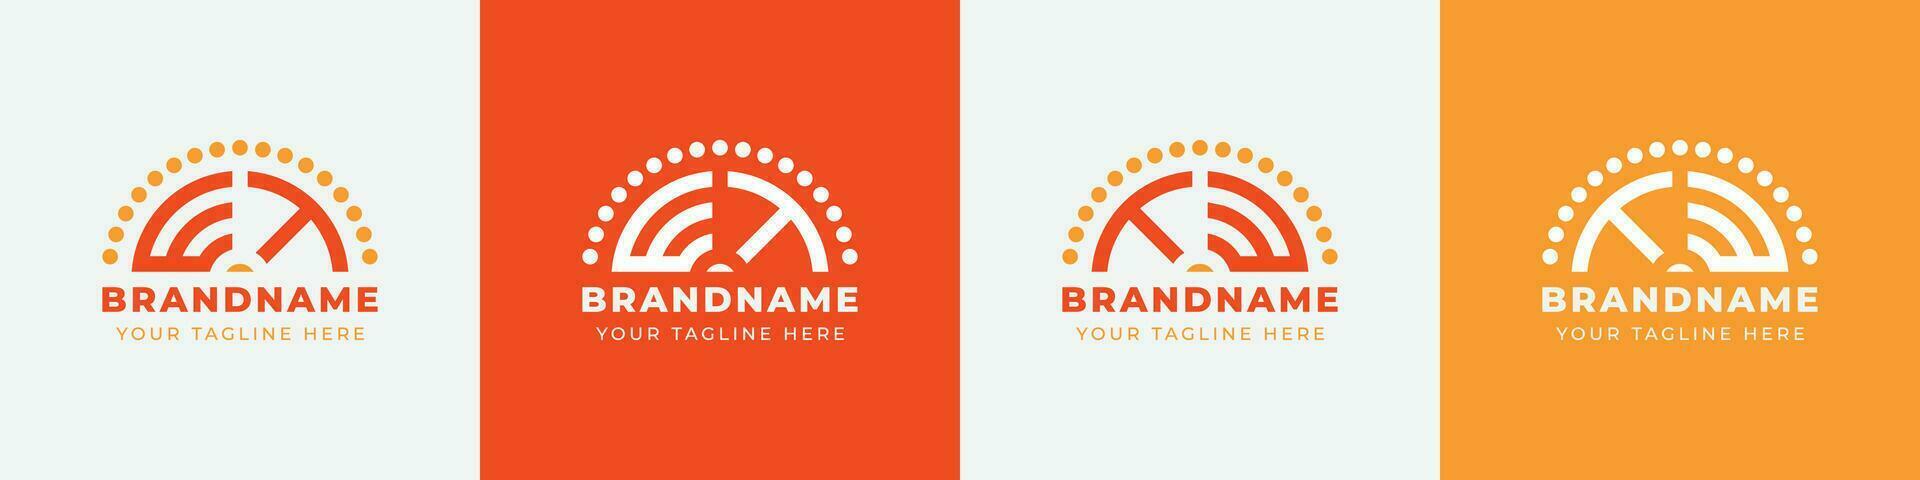 Letter TW and WT or TE and ET Sunrise  Logo Set, suitable for any business with TW, WT, TE, ET initials. vector